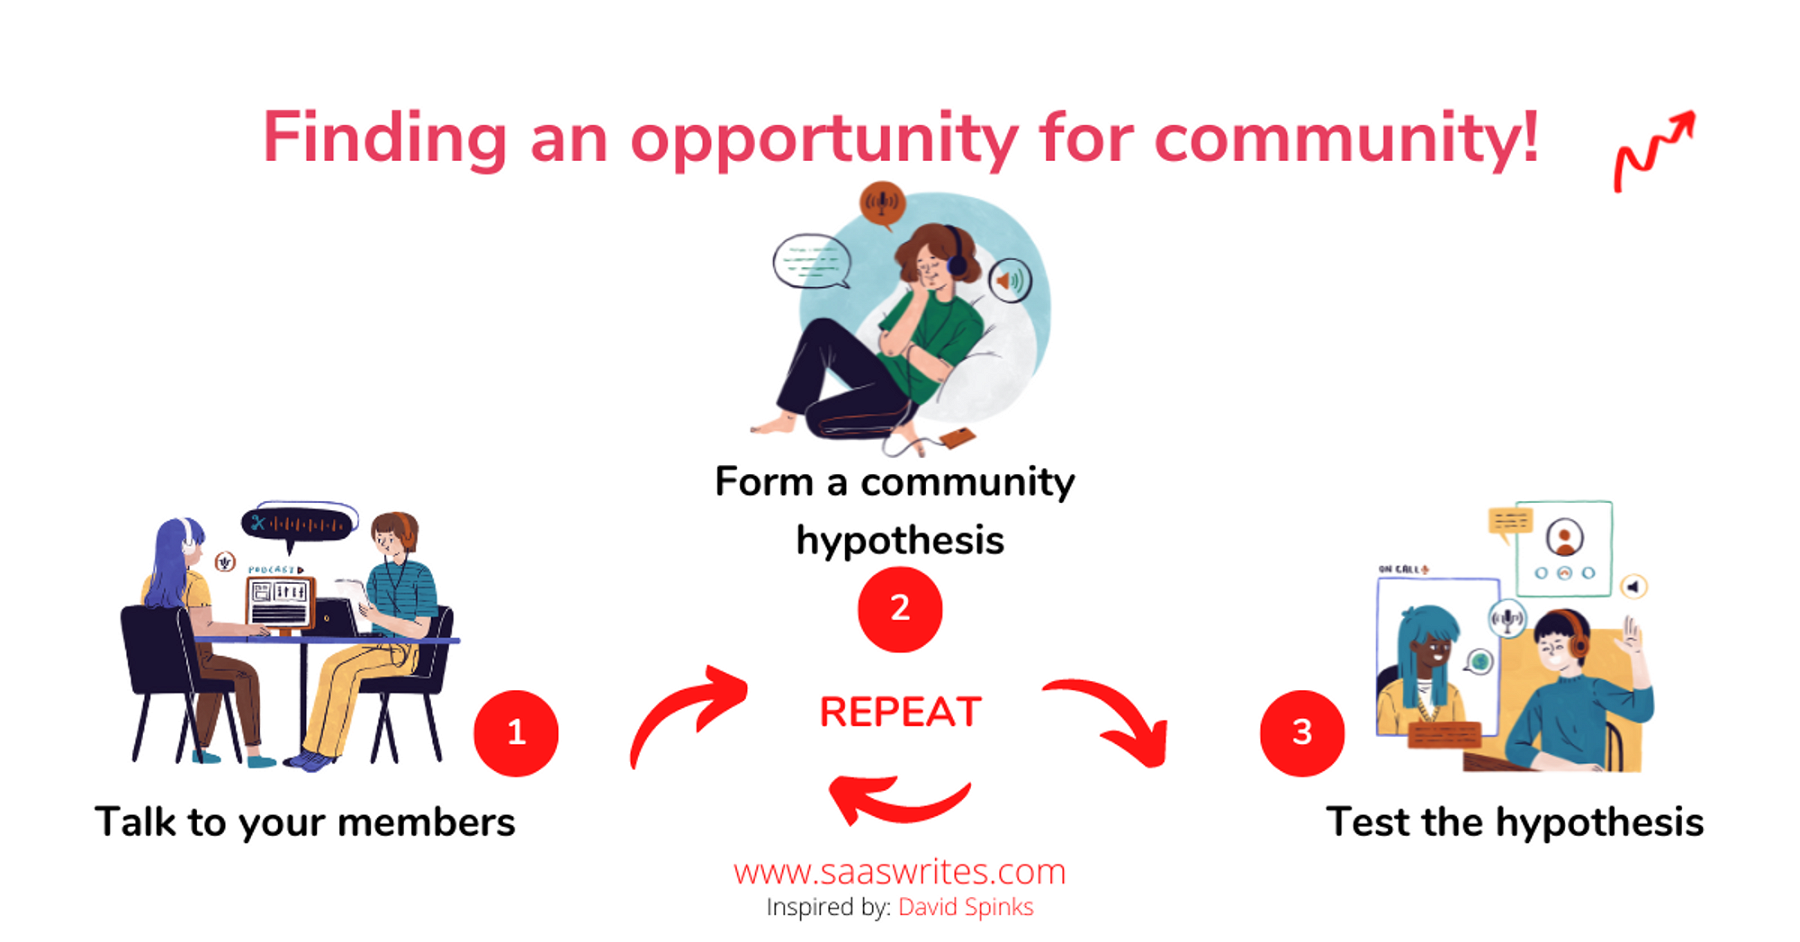 There is always an opportunity for community with your members for your SaaS.